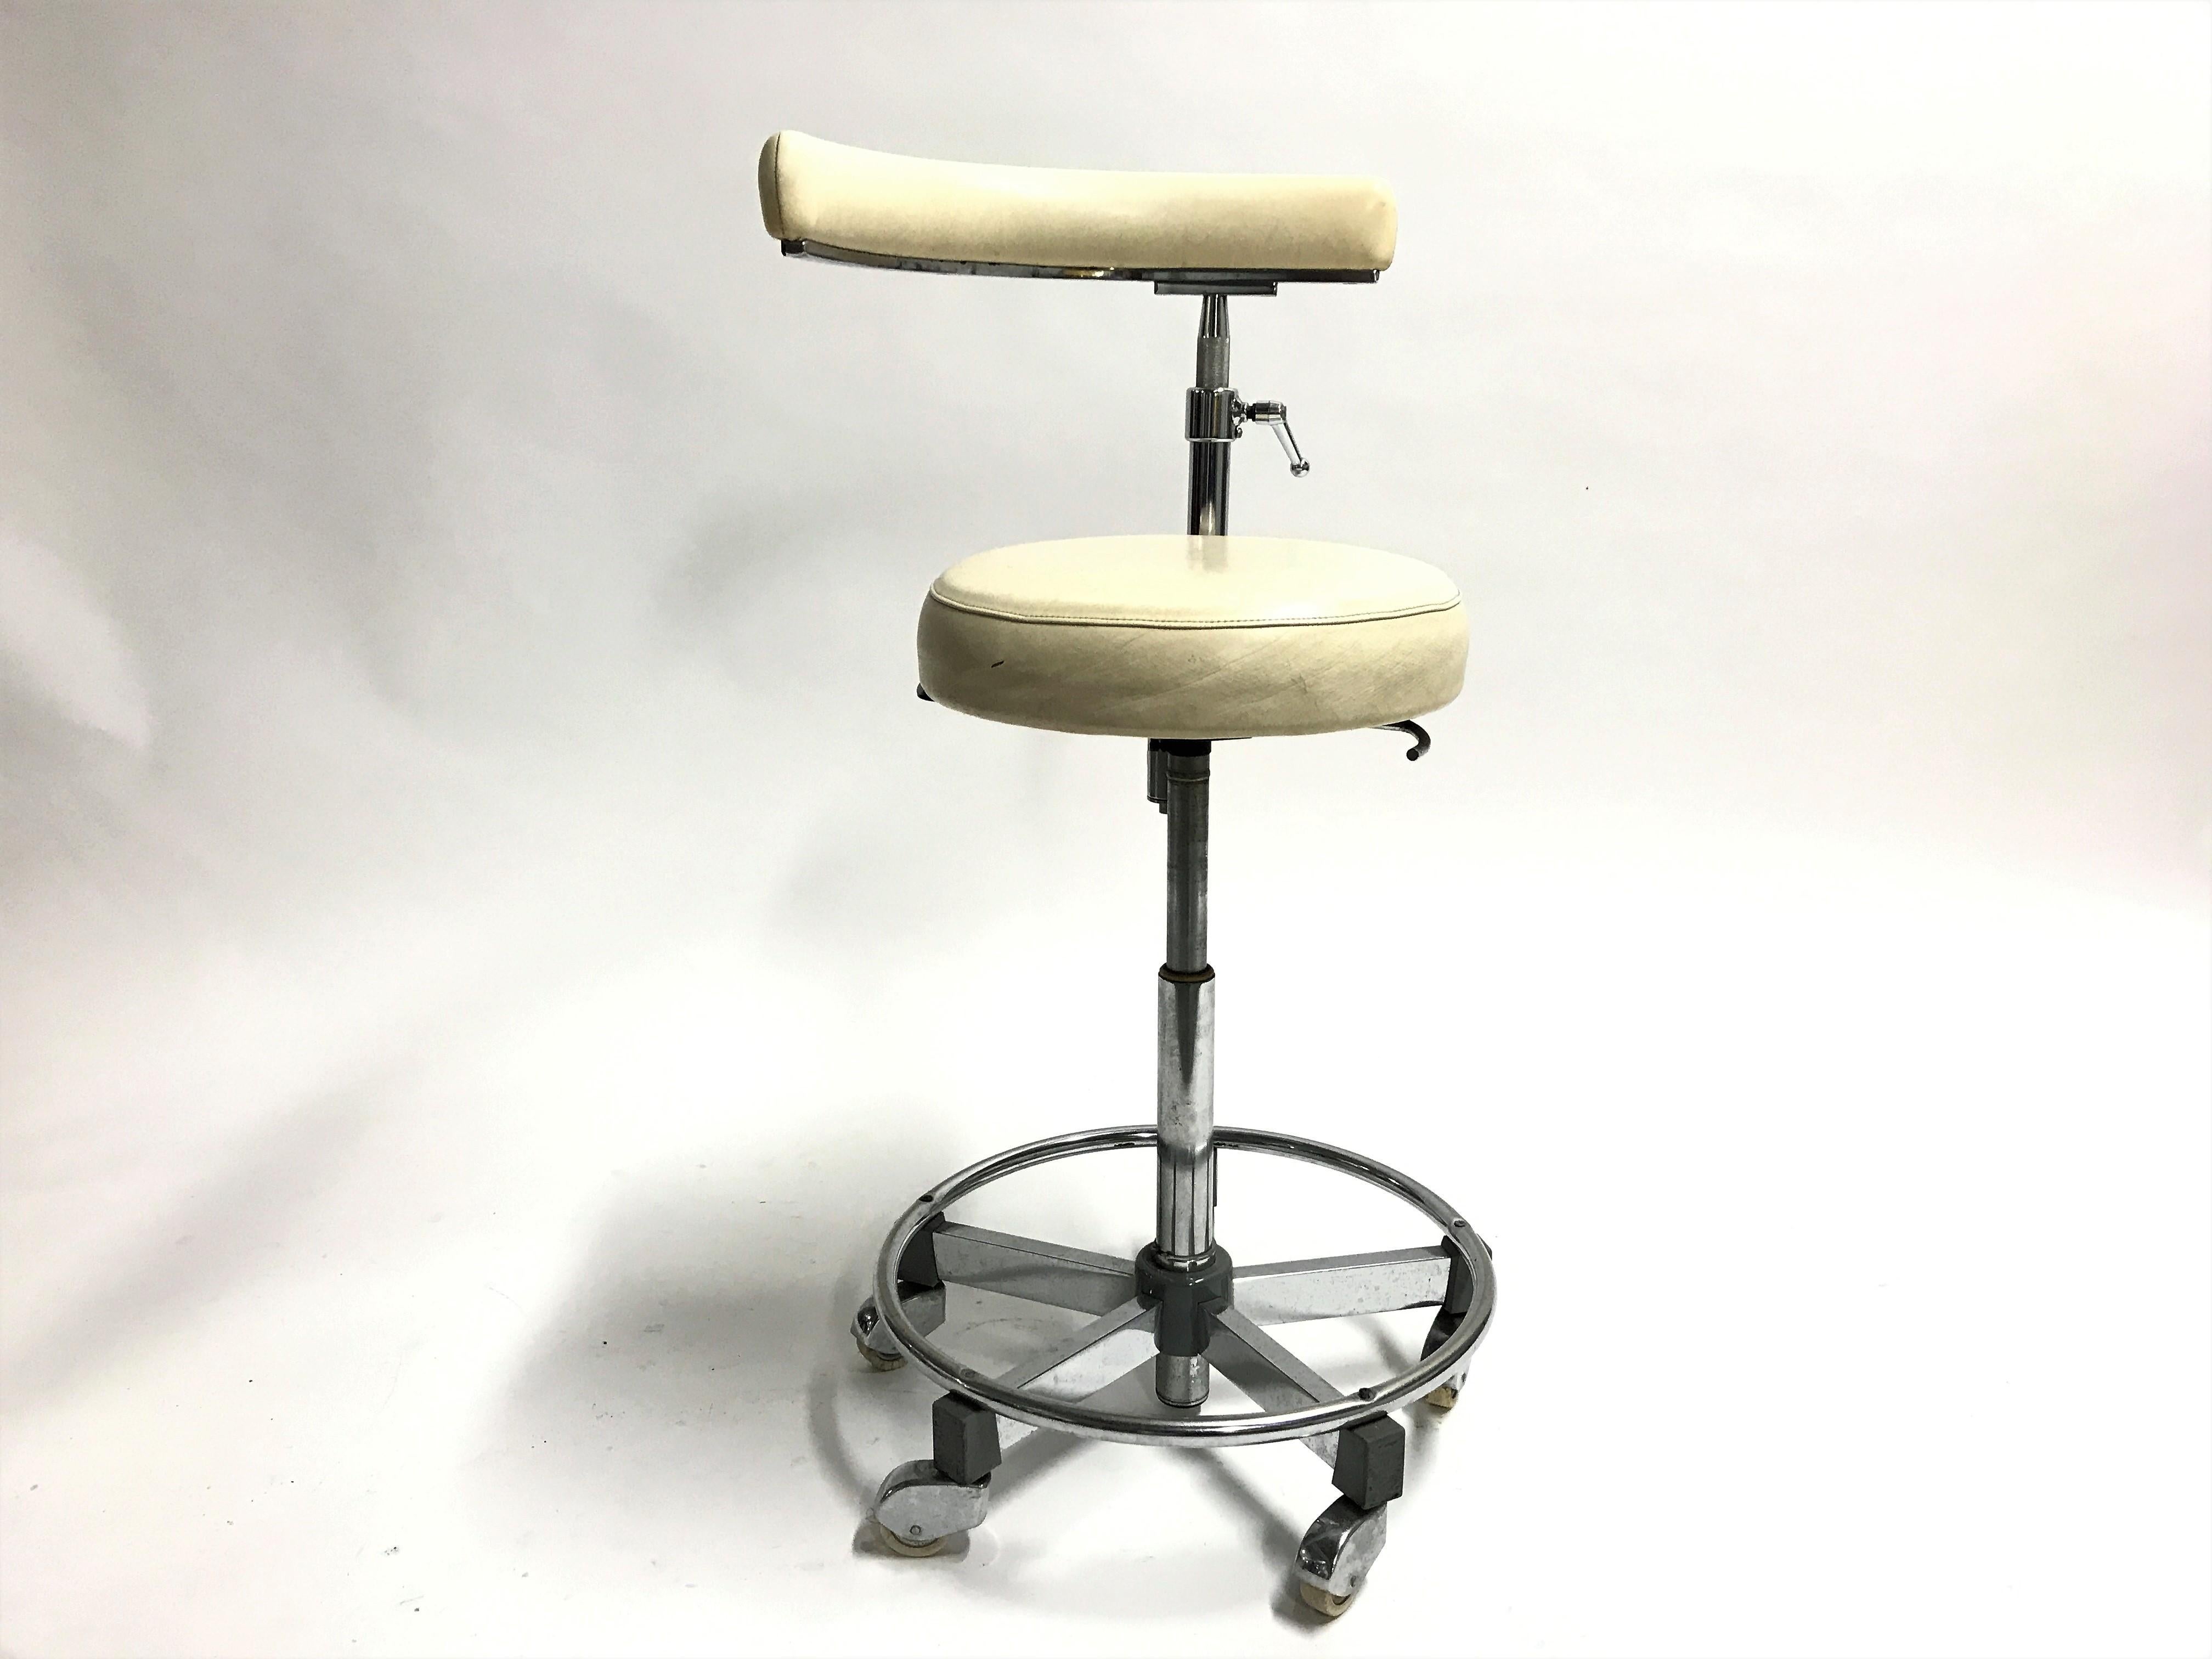 Vintage dentist chair made from chromed steel and skai.

This chair has wheels, is adjustable in height and the backrest is adjustable as well.

1970s, Germany

Height: 94cm/37”
Seat height from 47cm/18.5” to 66cm/26”
Diameter: 44cm/17”.

 